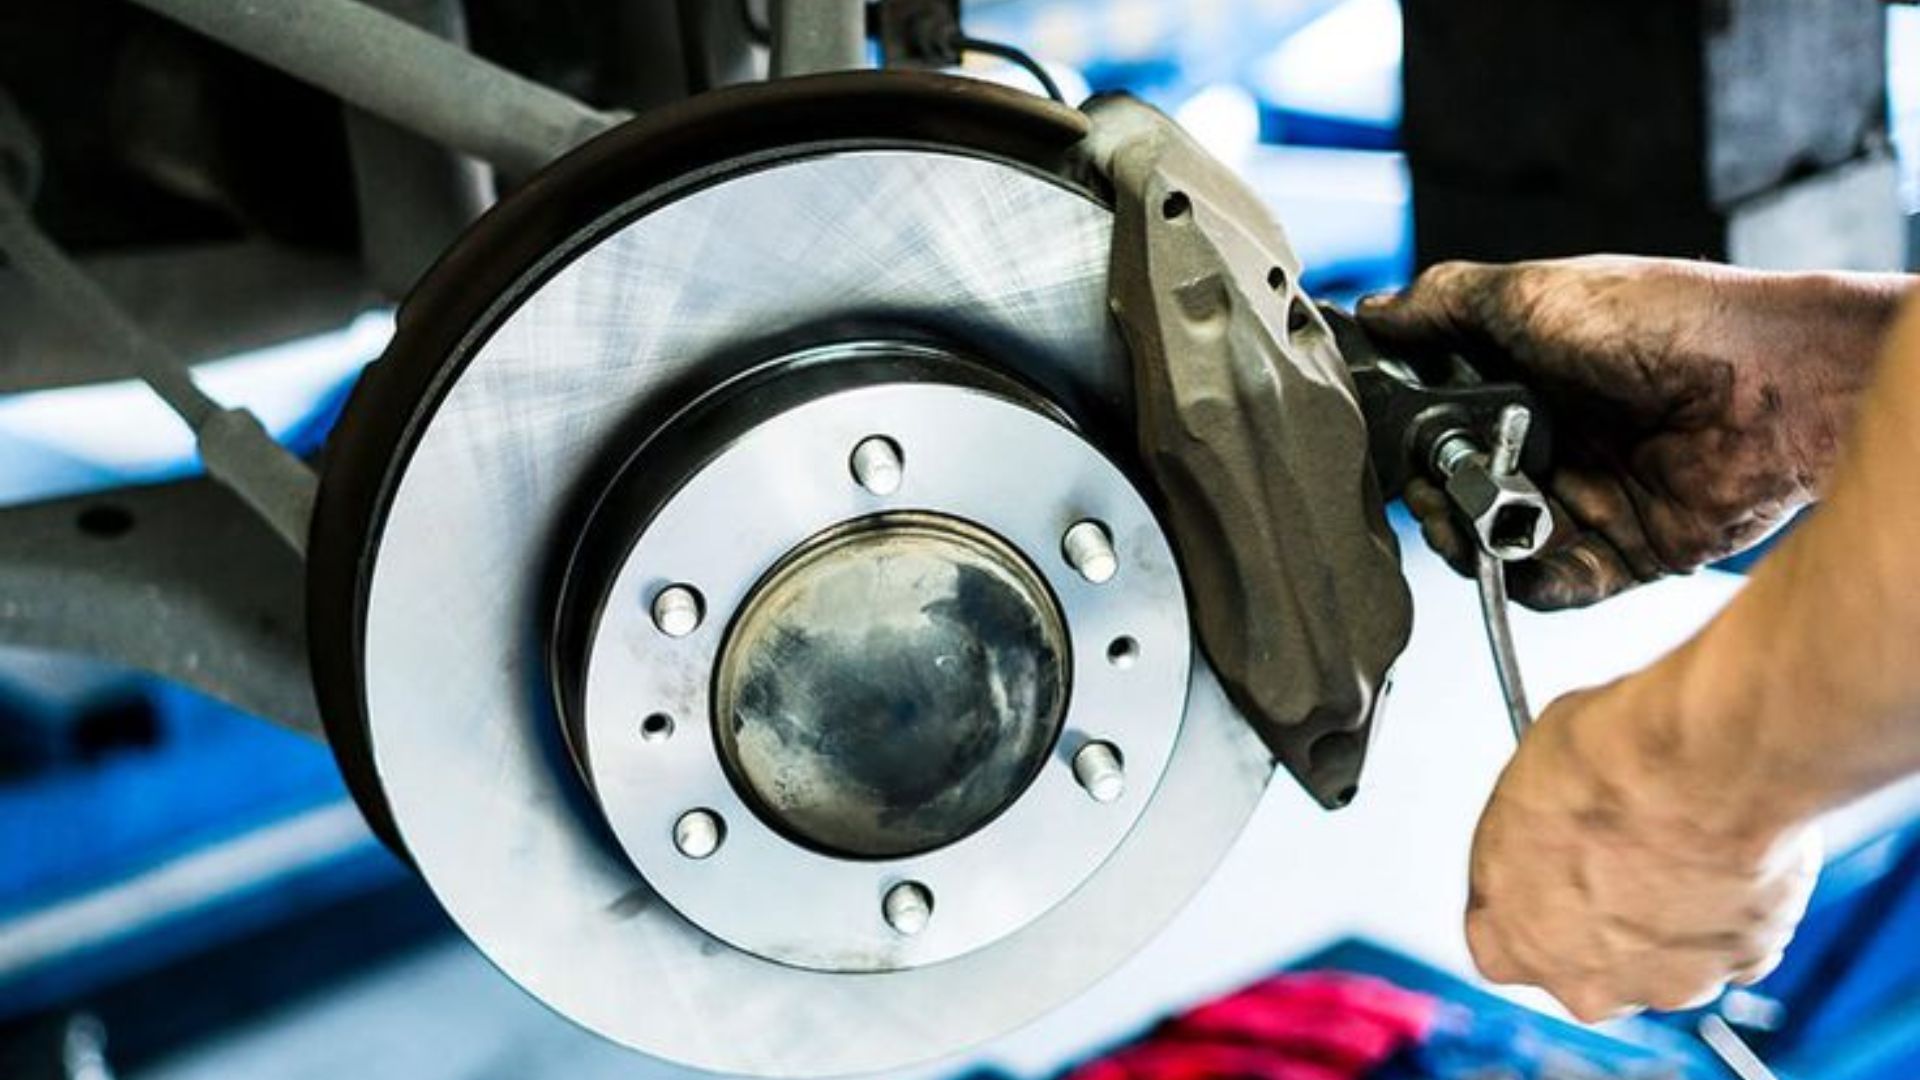 What Are the Warning Signs That Indicate Brake Maintenance is Needed